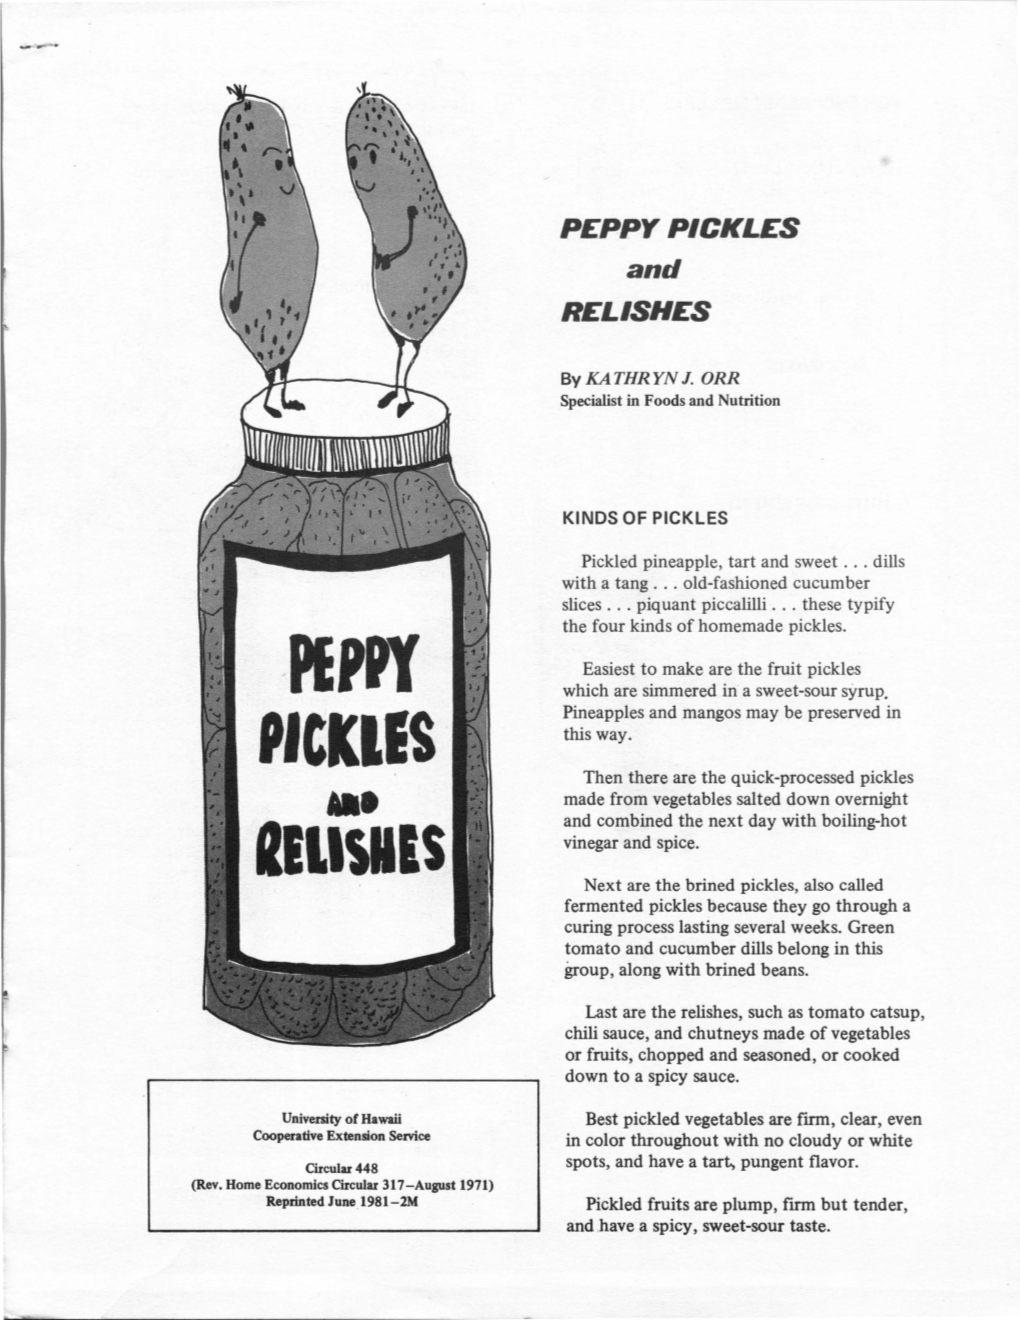 PEPPY PICKLES and RELISHES